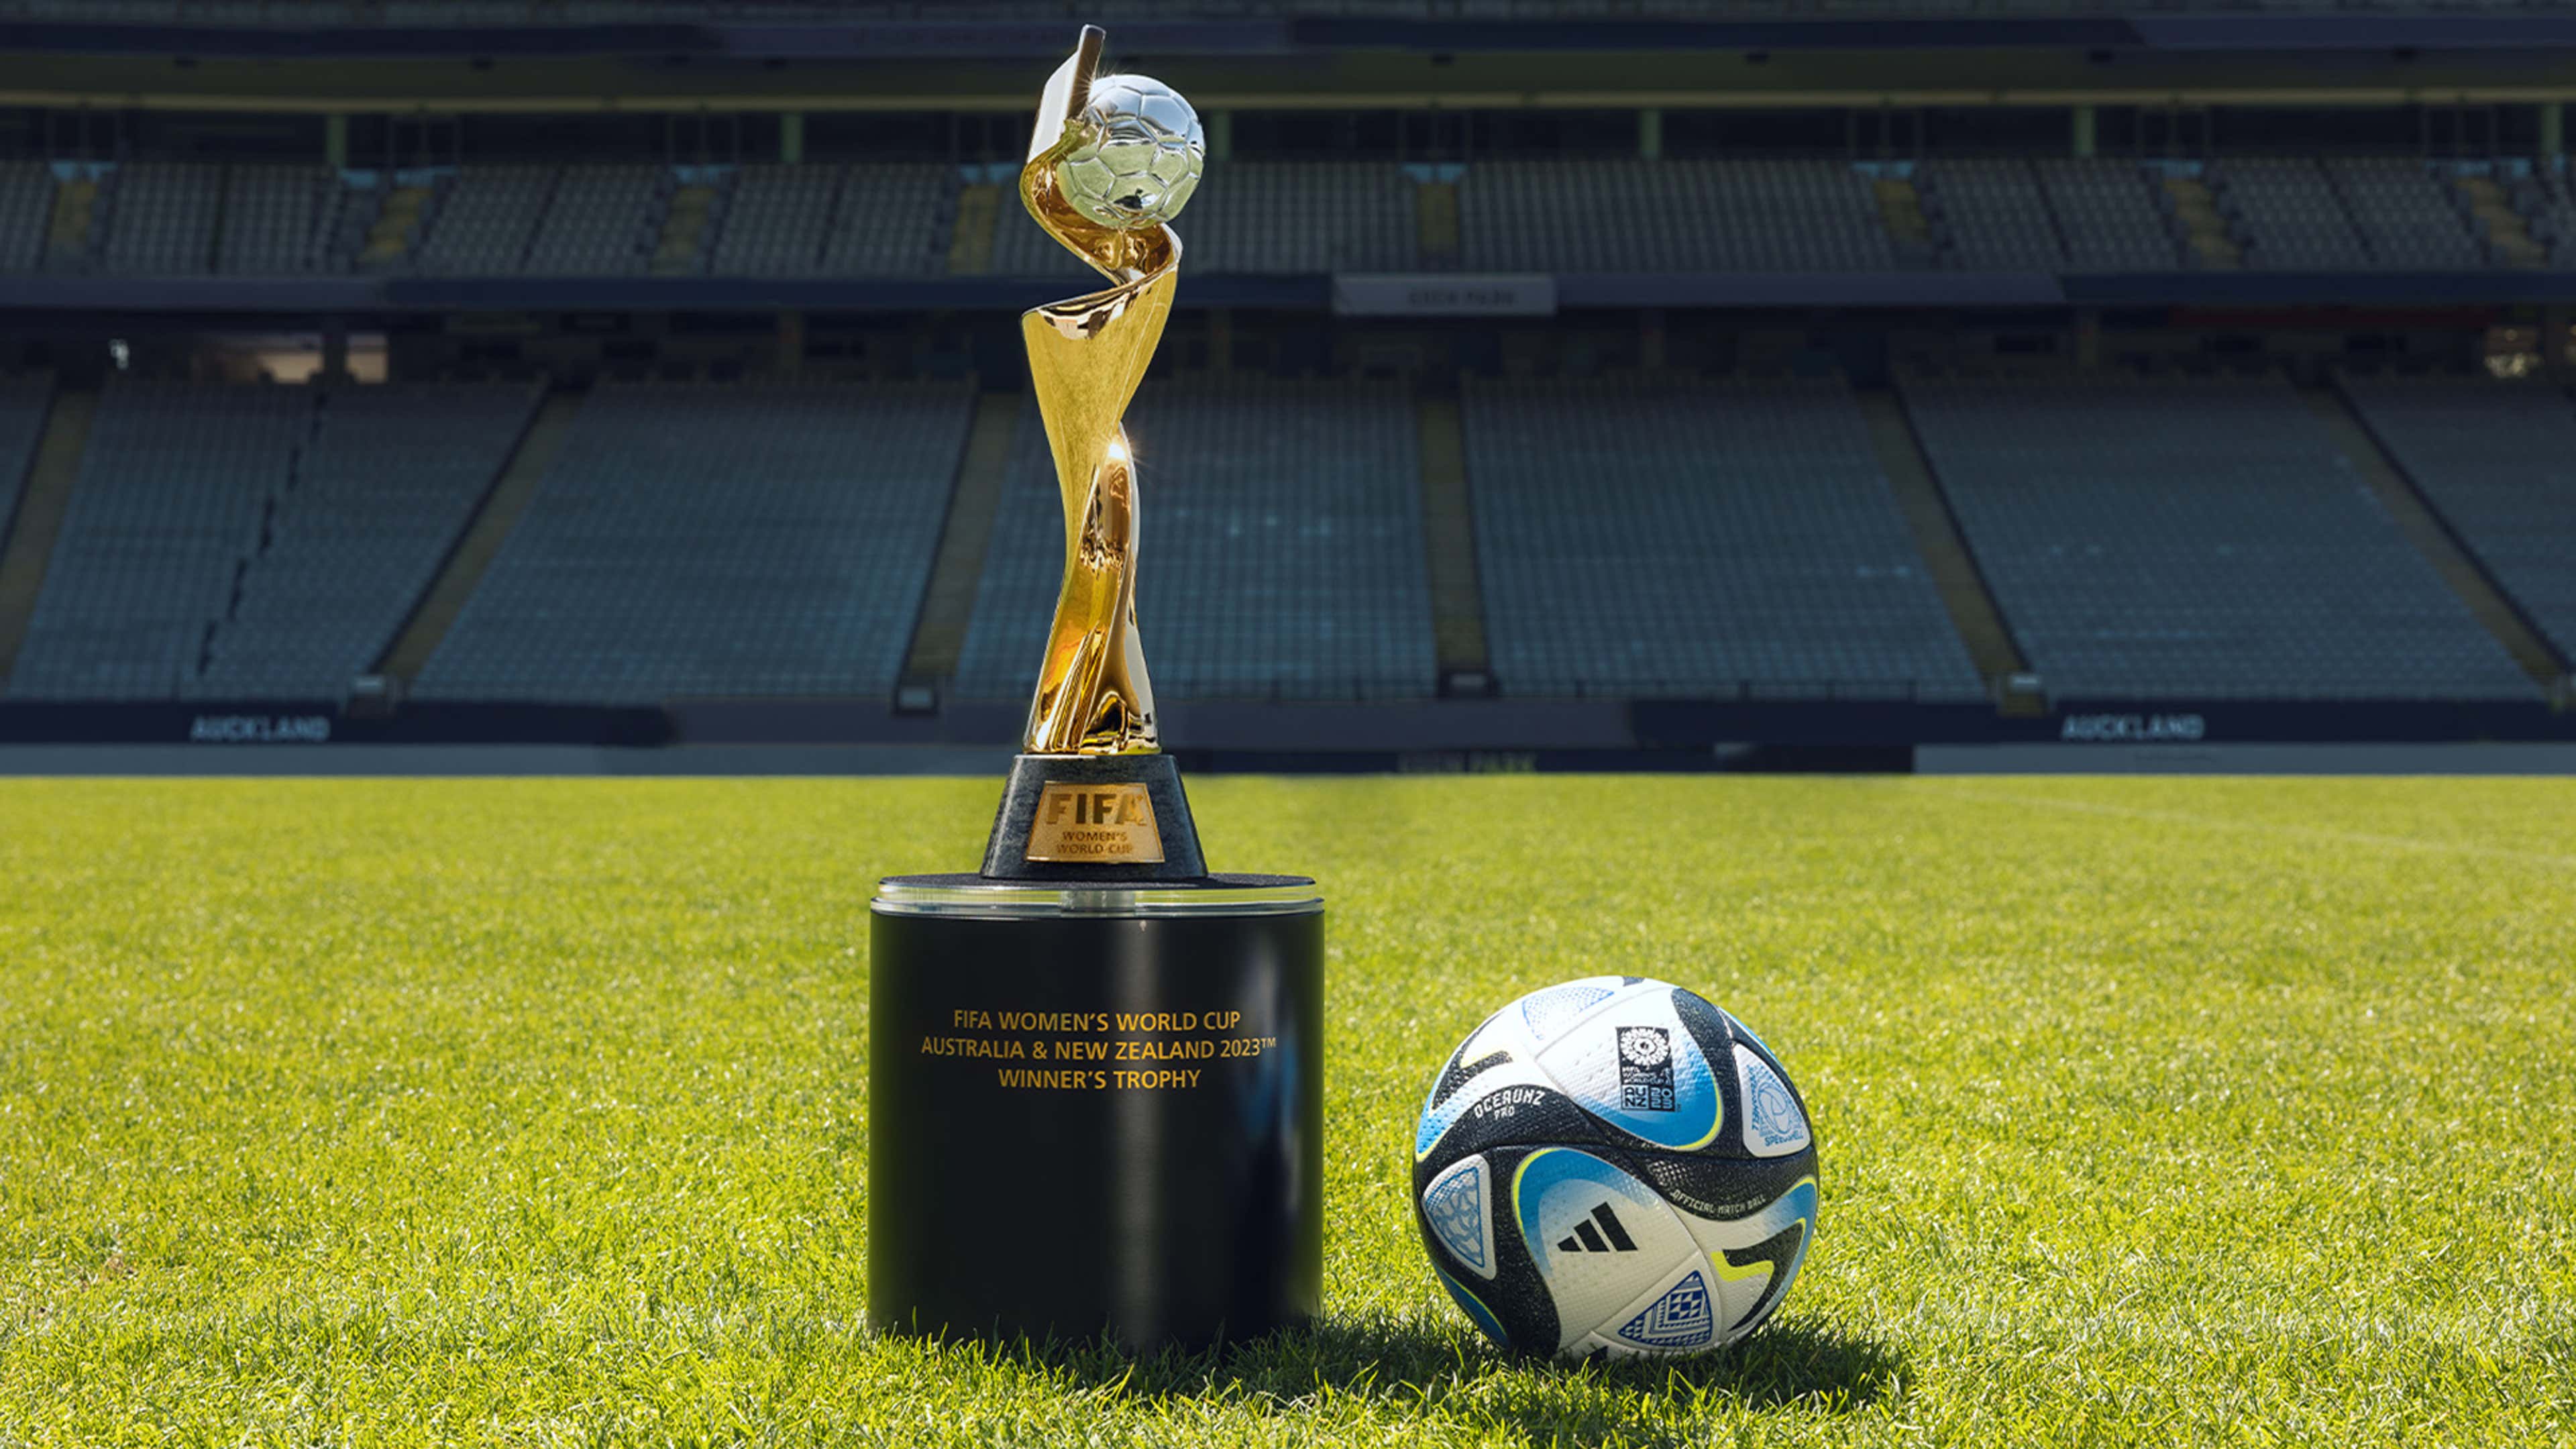 PICTURES: England stars unveil official 'brazuca' World Cup match